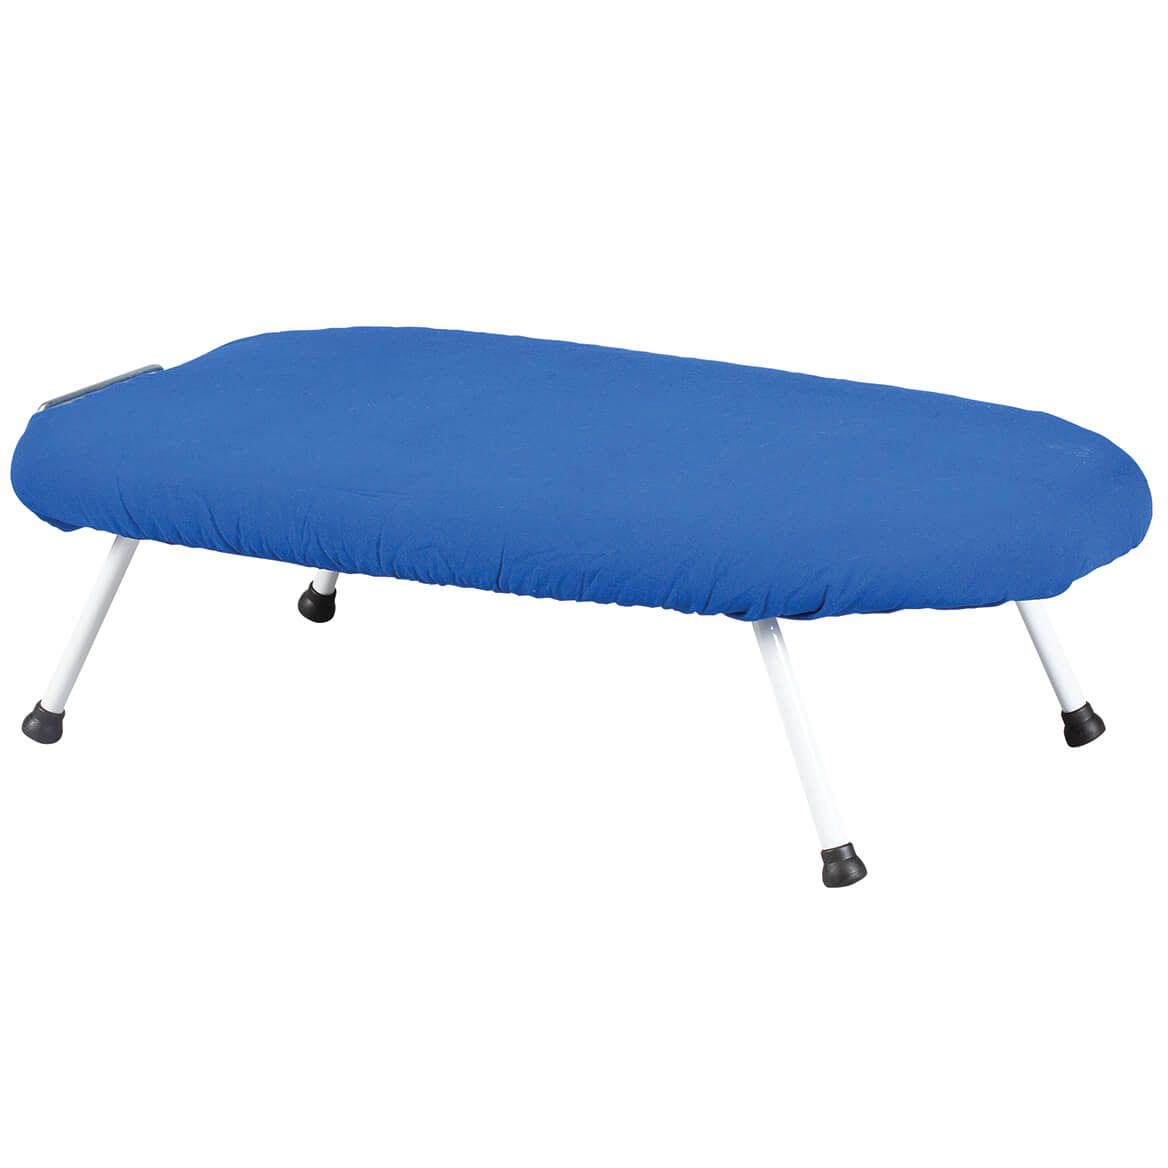 Tabletop Ironing Board Cover + '-' + 355698